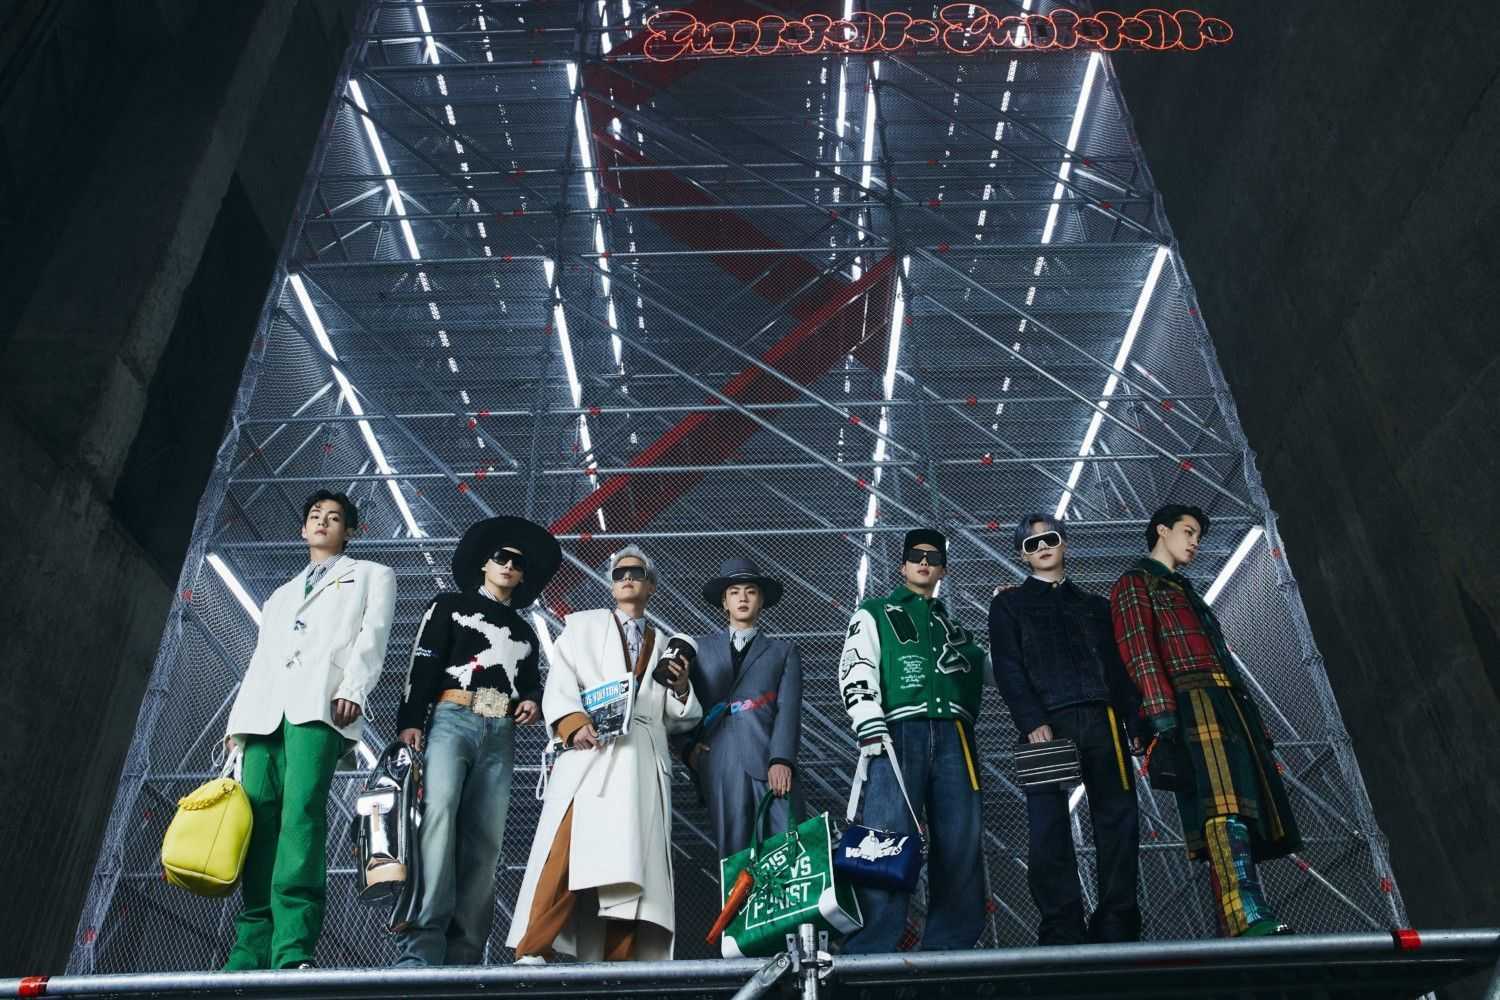 Check Out The New LV Mirror Mirror Pieces From #LVMENFW21